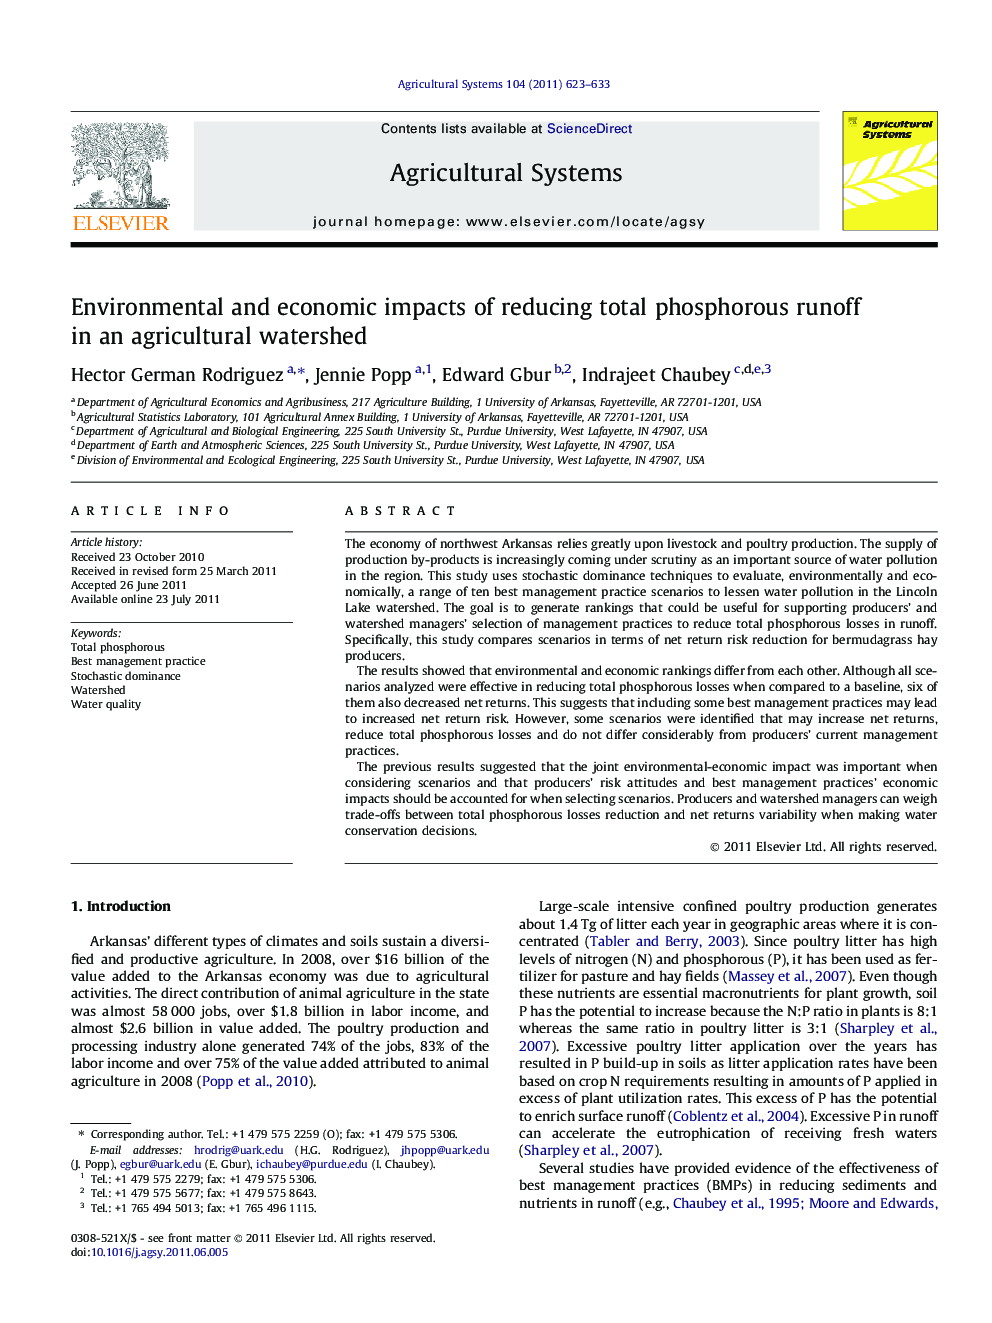 Environmental and economic impacts of reducing total phosphorous runoff in an agricultural watershed